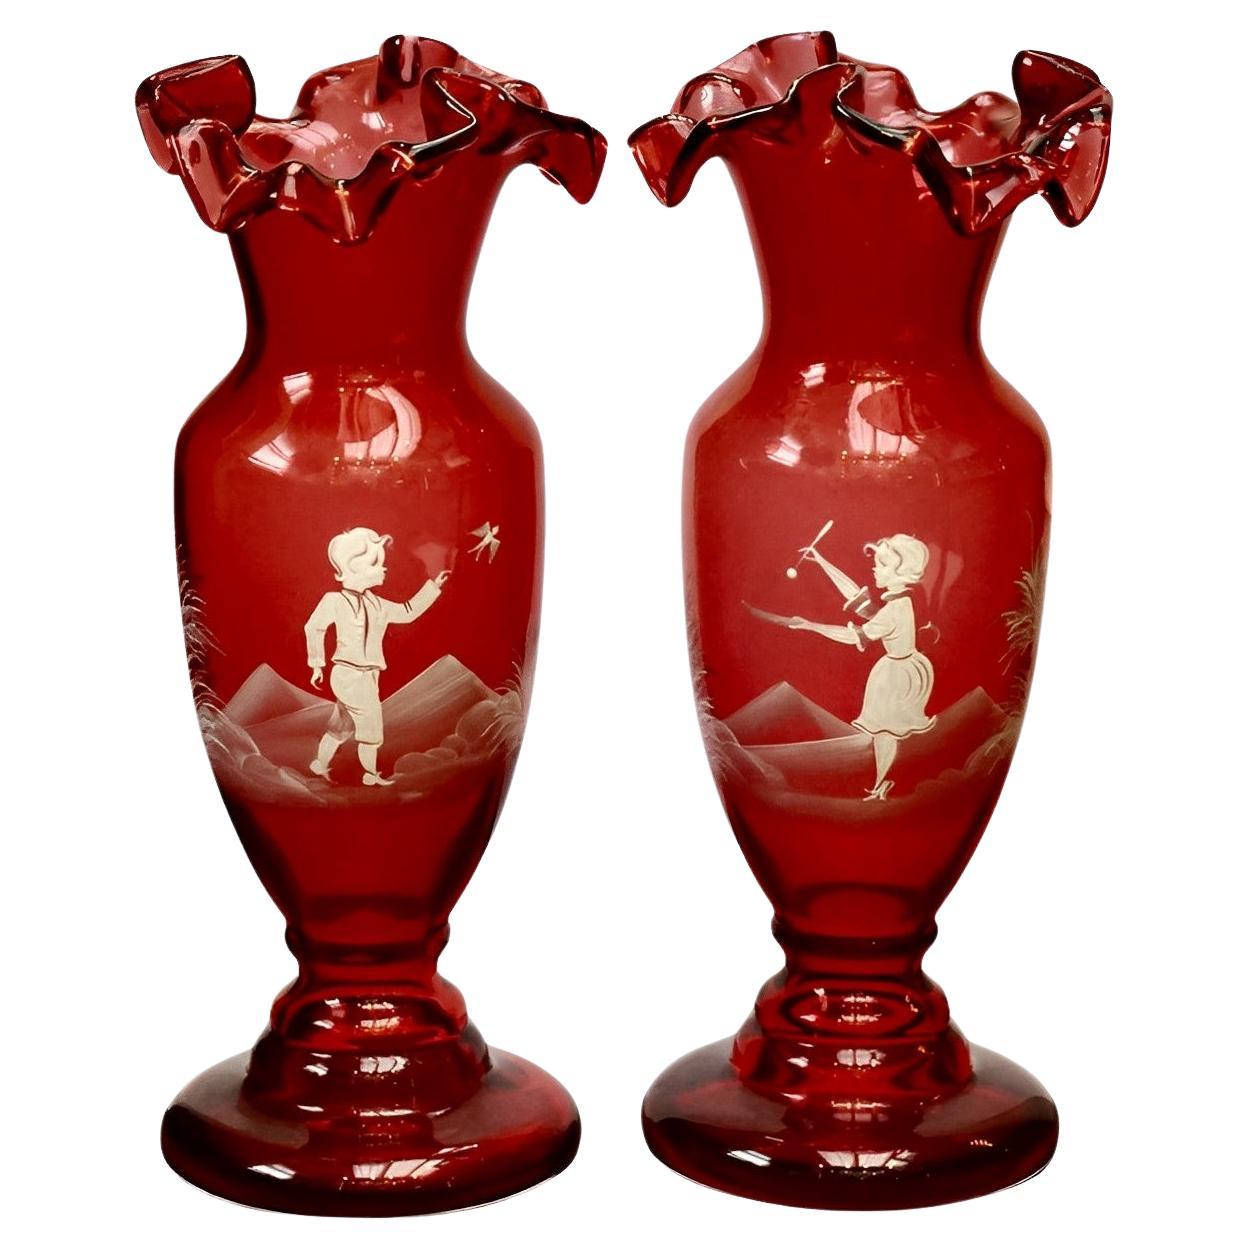 Pair Mary Gregory Hand Painted Cranberry Glass Vases - post war period